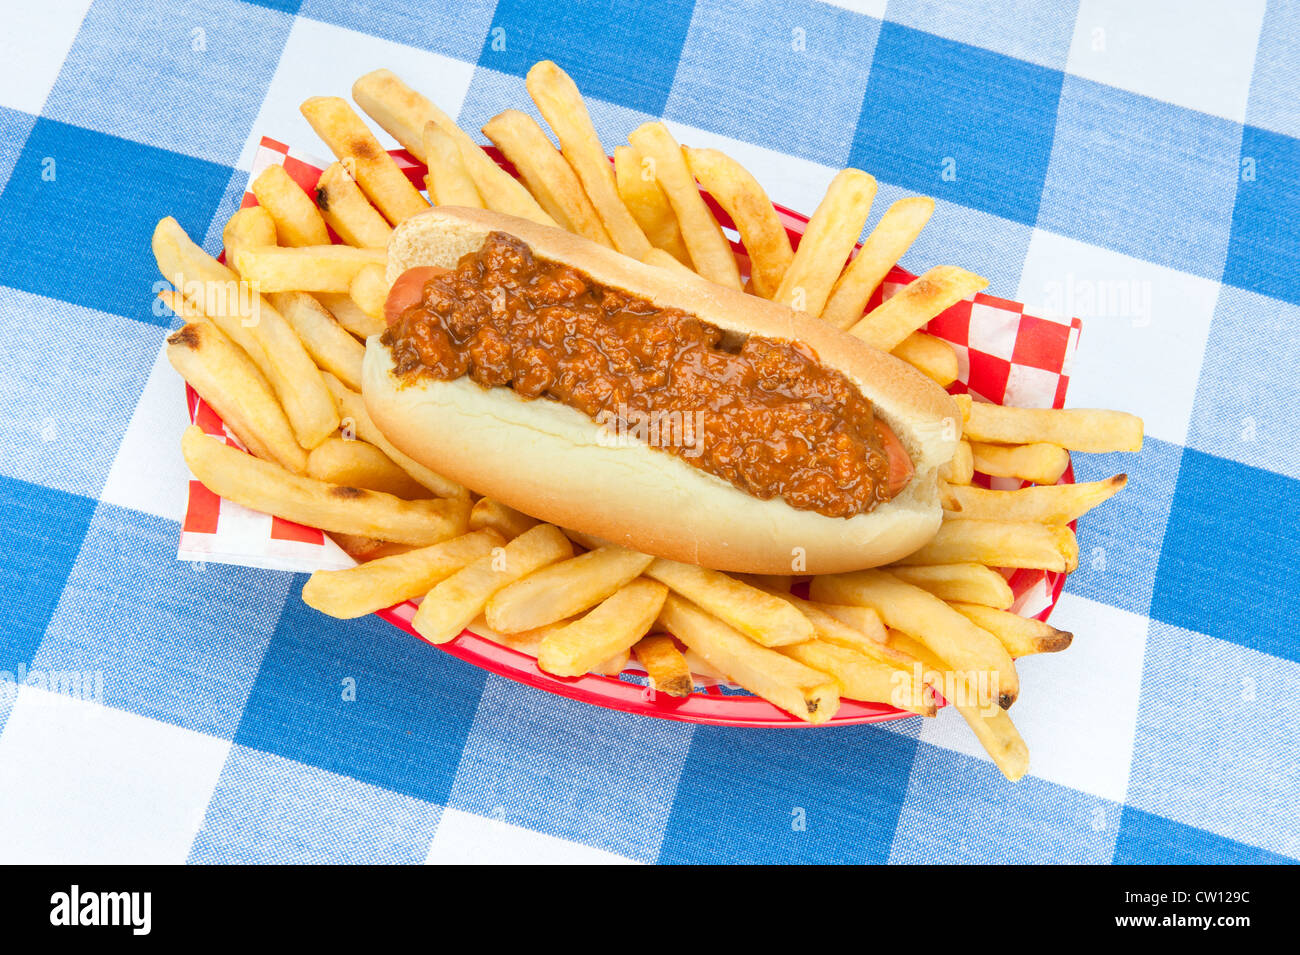 A fresh chilidog with a basket of French fried potatoes on a blue, checkered tablecloth. Stock Photo